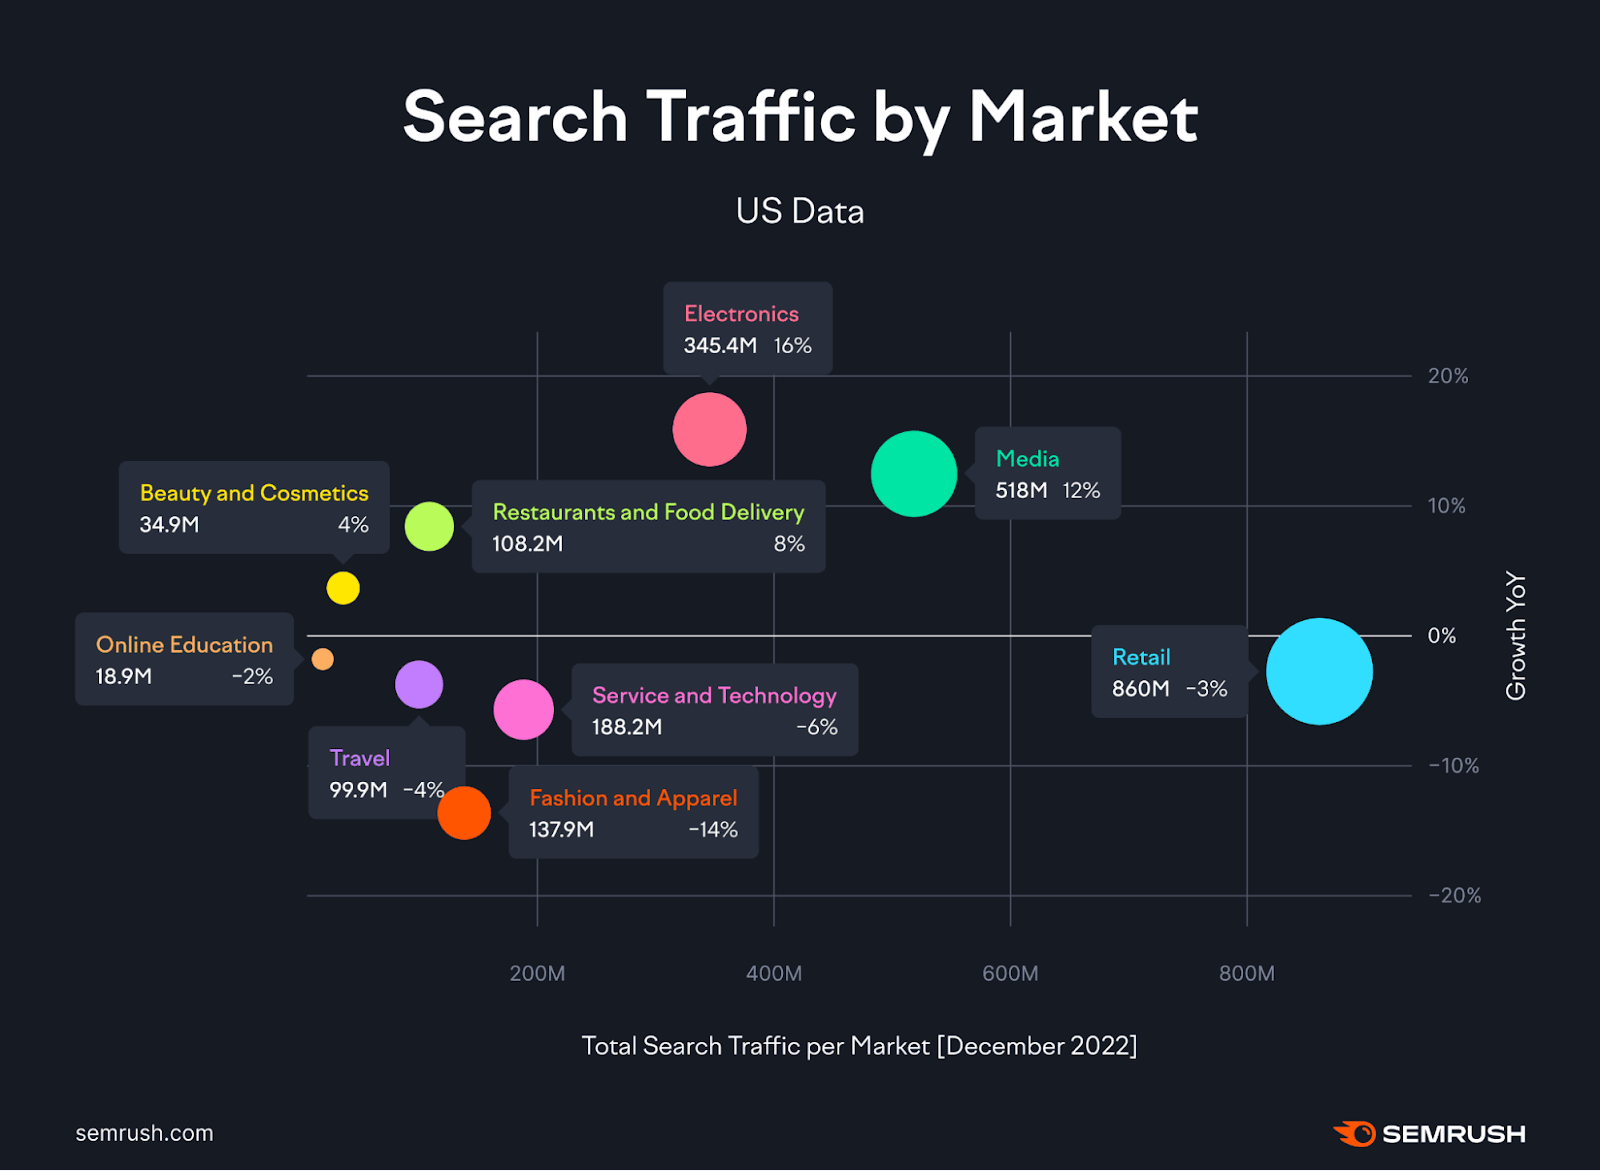 Semrush's "Search traffic by market" infographic